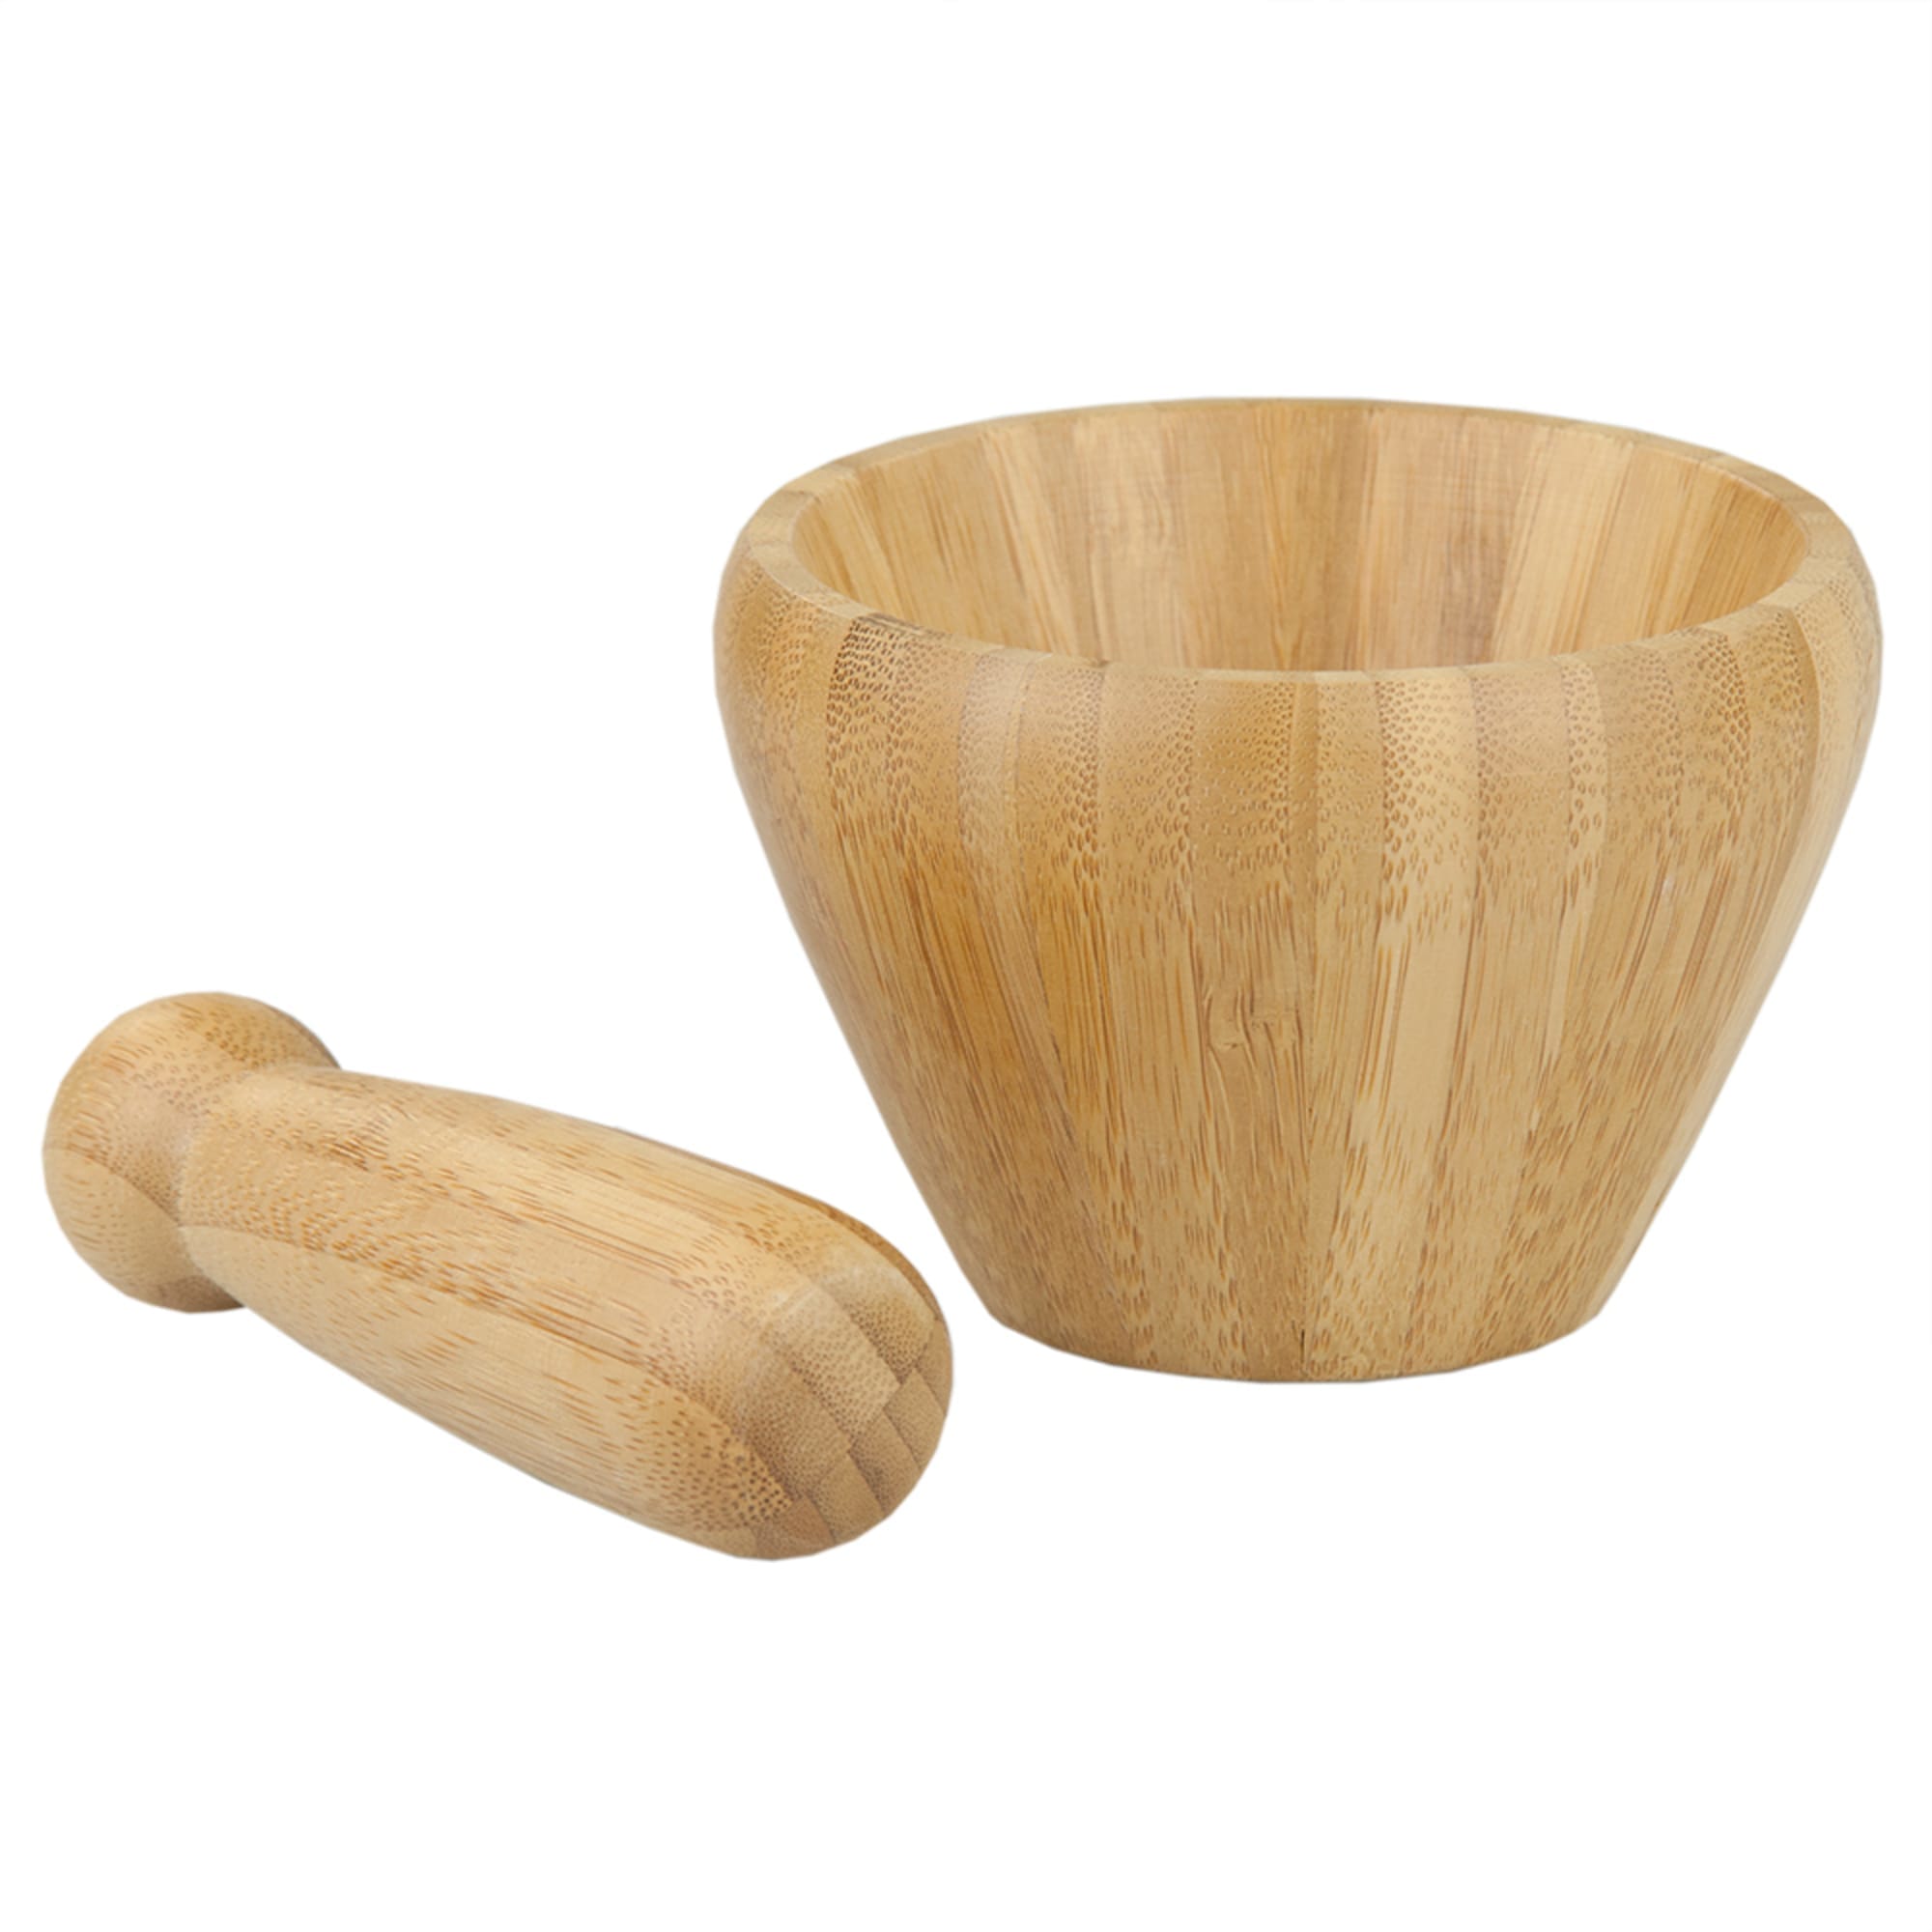 Home Basics Bamboo Mortar and Pestle $8.00 EACH, CASE PACK OF 12